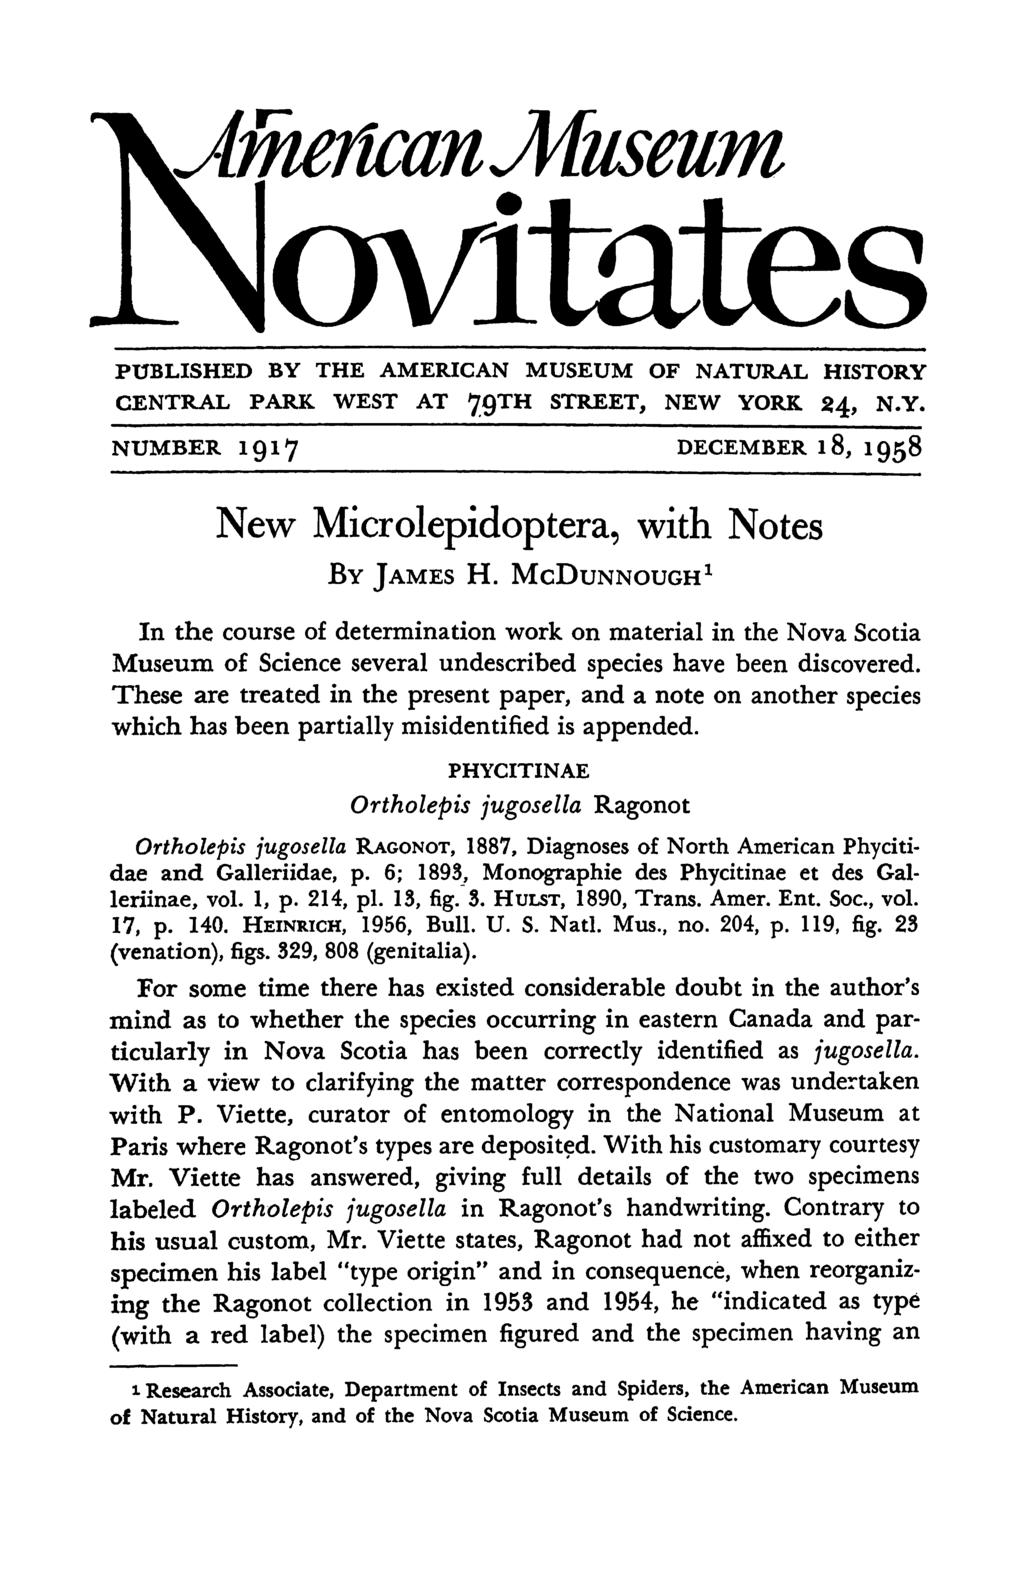 M e'ican%musezrn PUBLISHED BY THE AMERICAN MUSEUM OF NATURAL HISTORY CENTRAL PARK WEST AT 79TH STREET, NEW YORK 24, N.Y. NUMBER 1917 DECEMBER i8, 1958 New Microlepidoptera, with Notes BY JAMES H.